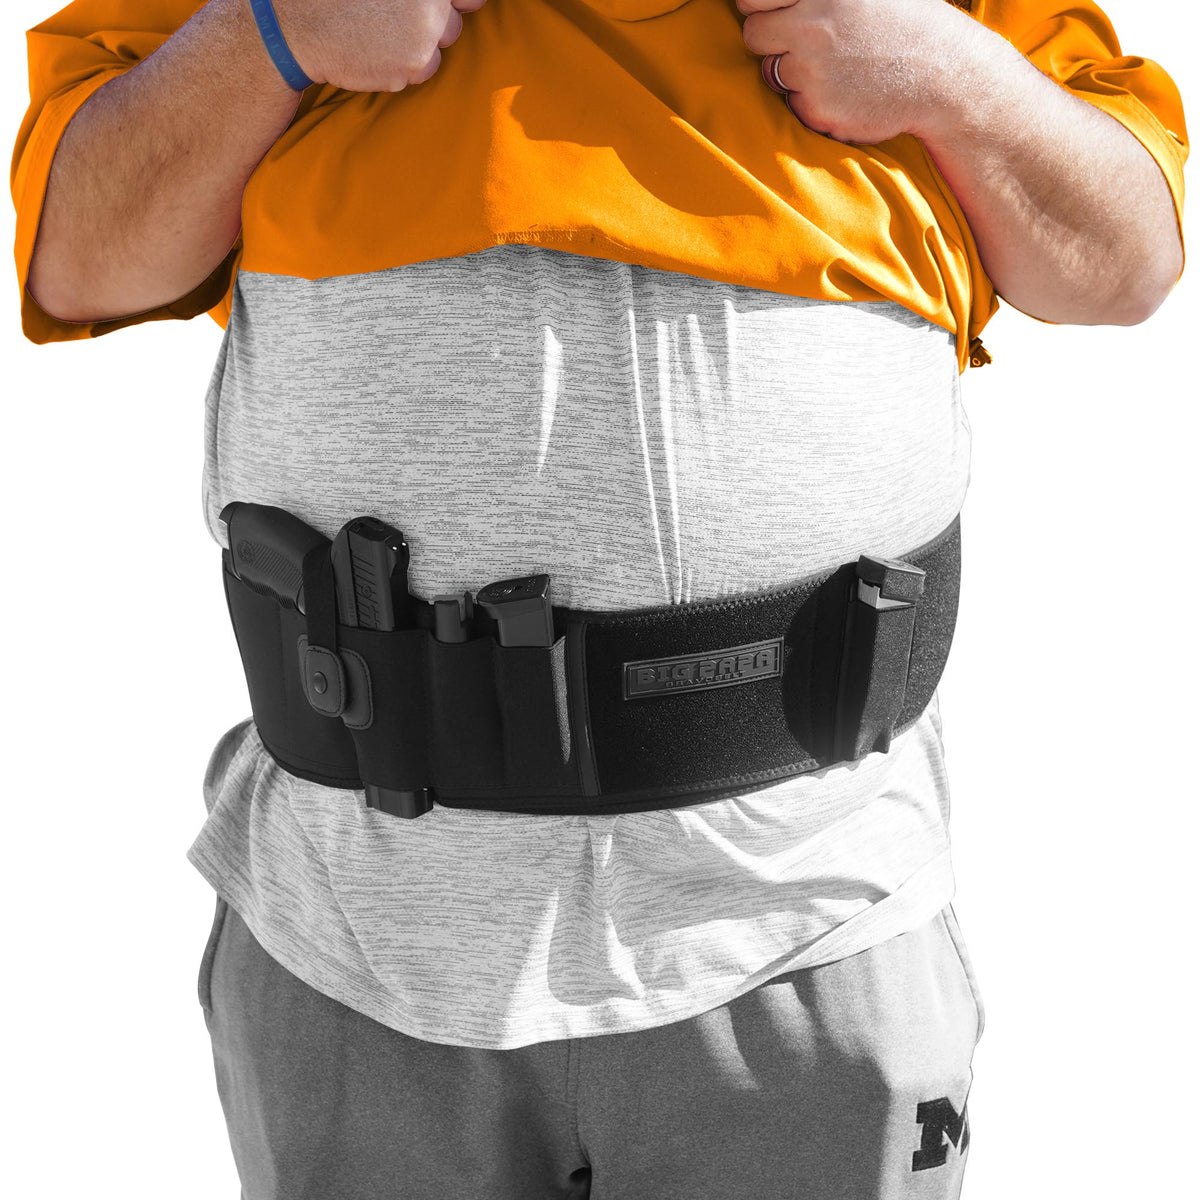 BravoBelt Big Papa Edition - Belly Band Holster - XXL Up to 65&quot;